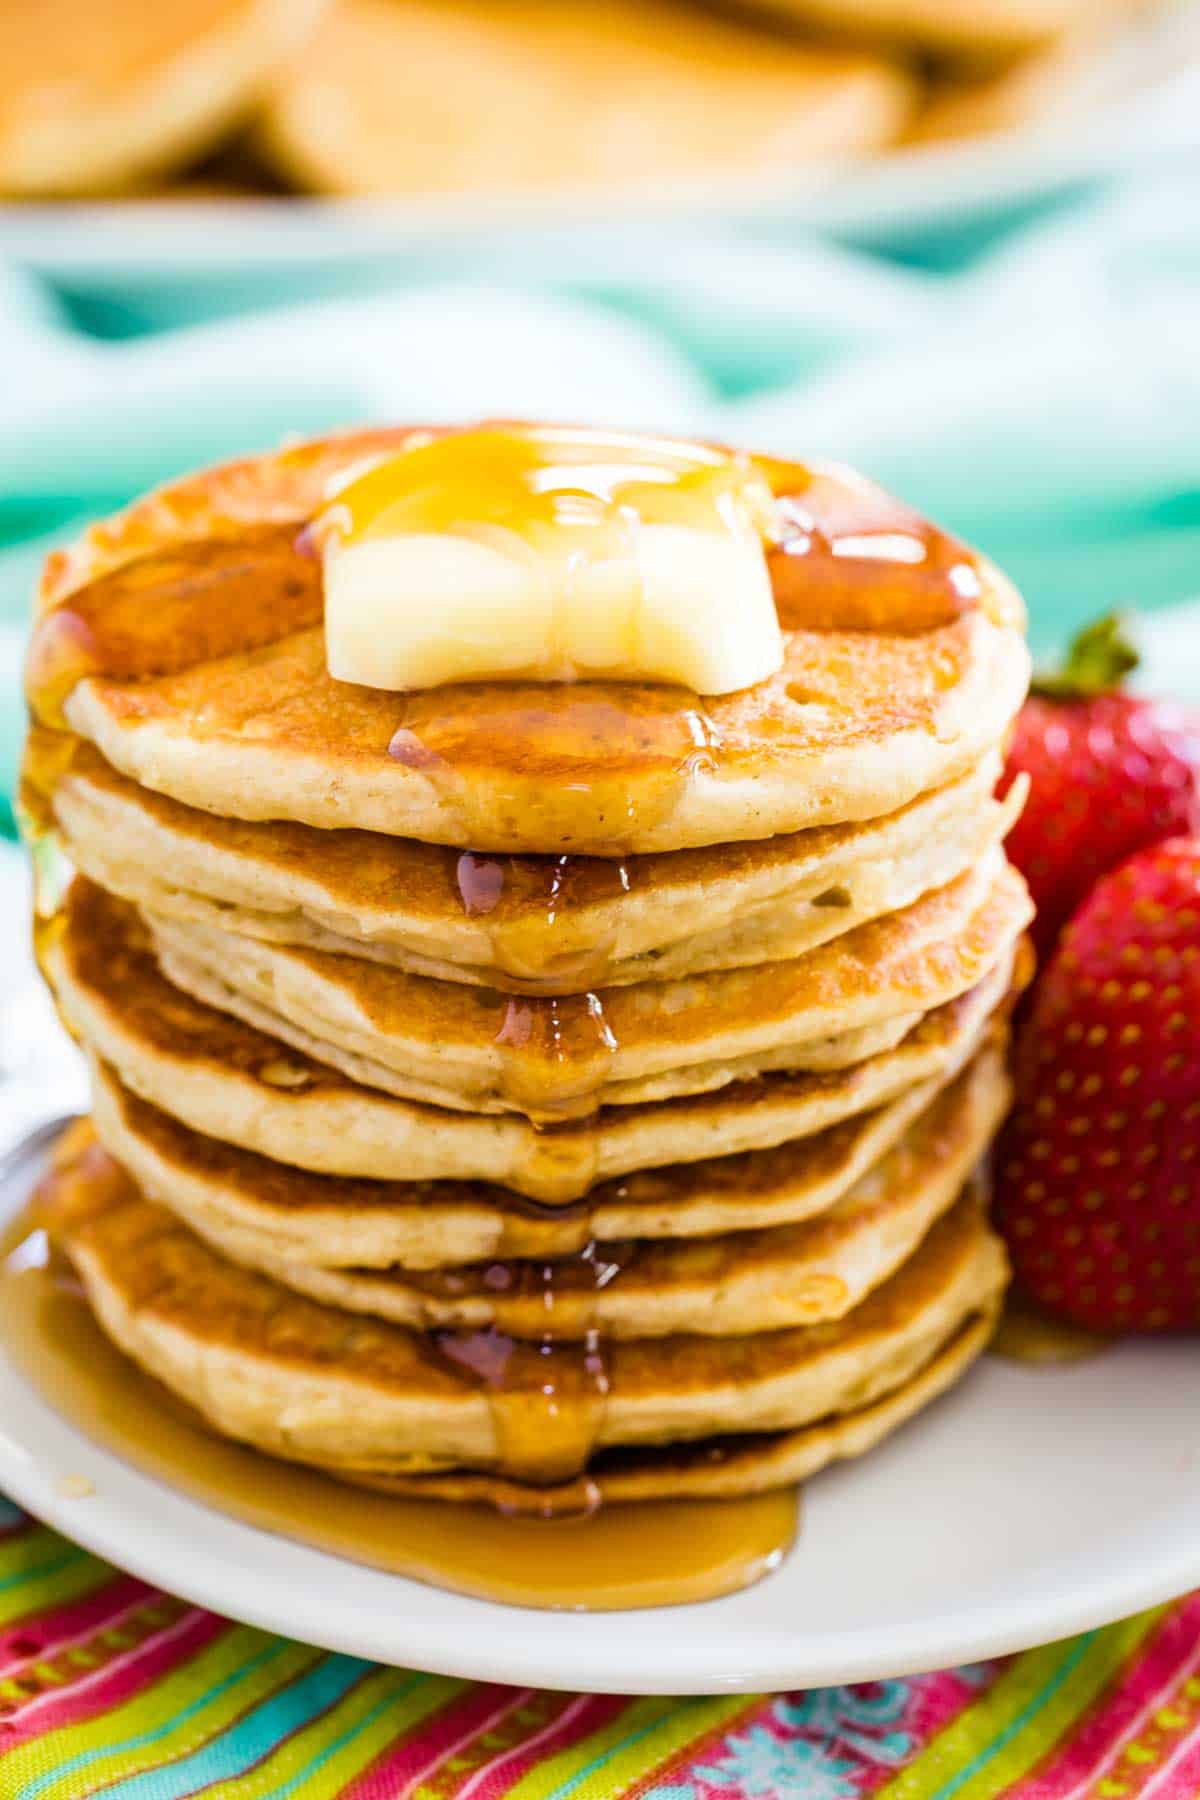 A stack of gluten free silver dollar pancakes topped with butter and syrup is shown on a plate with strawberries next to it.